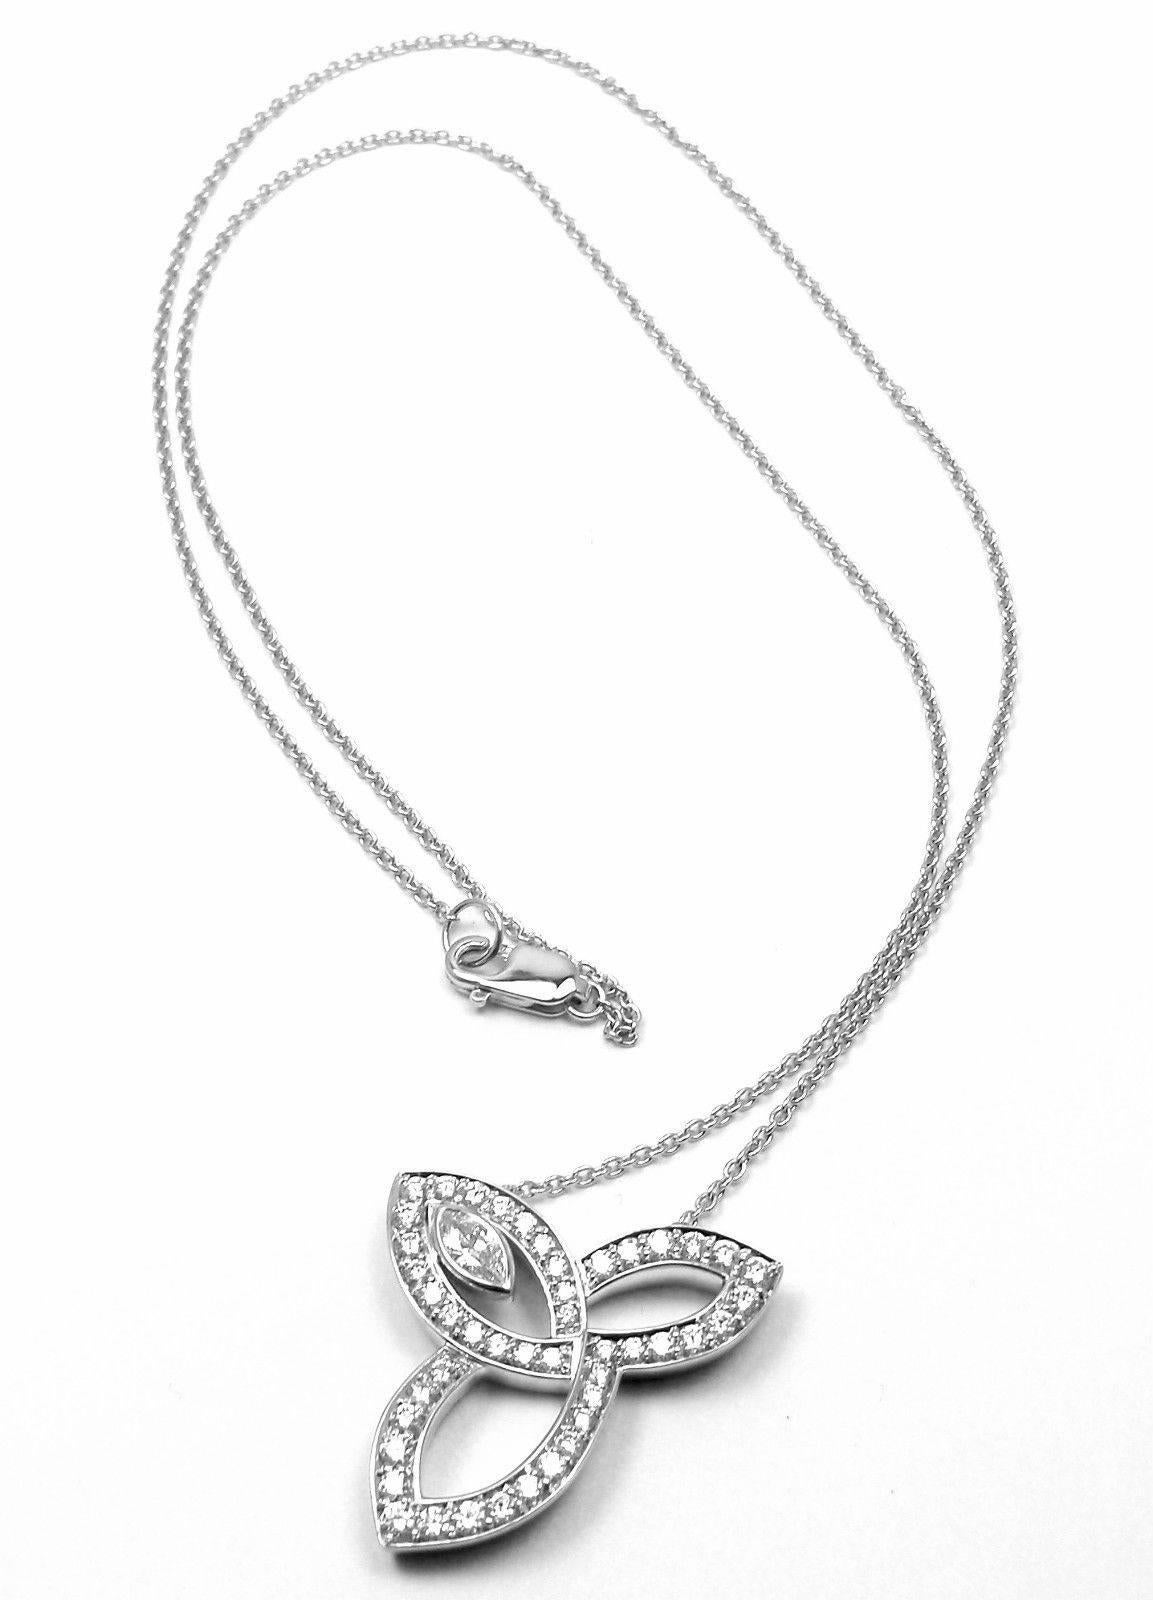 Platinum Diamond Lily Cluster Pendant Necklace by Harry Winston.  
With 1 marquise and 45 round brilliant diamonds weighing a total of approximately 0.67ct

Details: 
Weight: 11.6 grams 
Measurements: Chain: Length 16